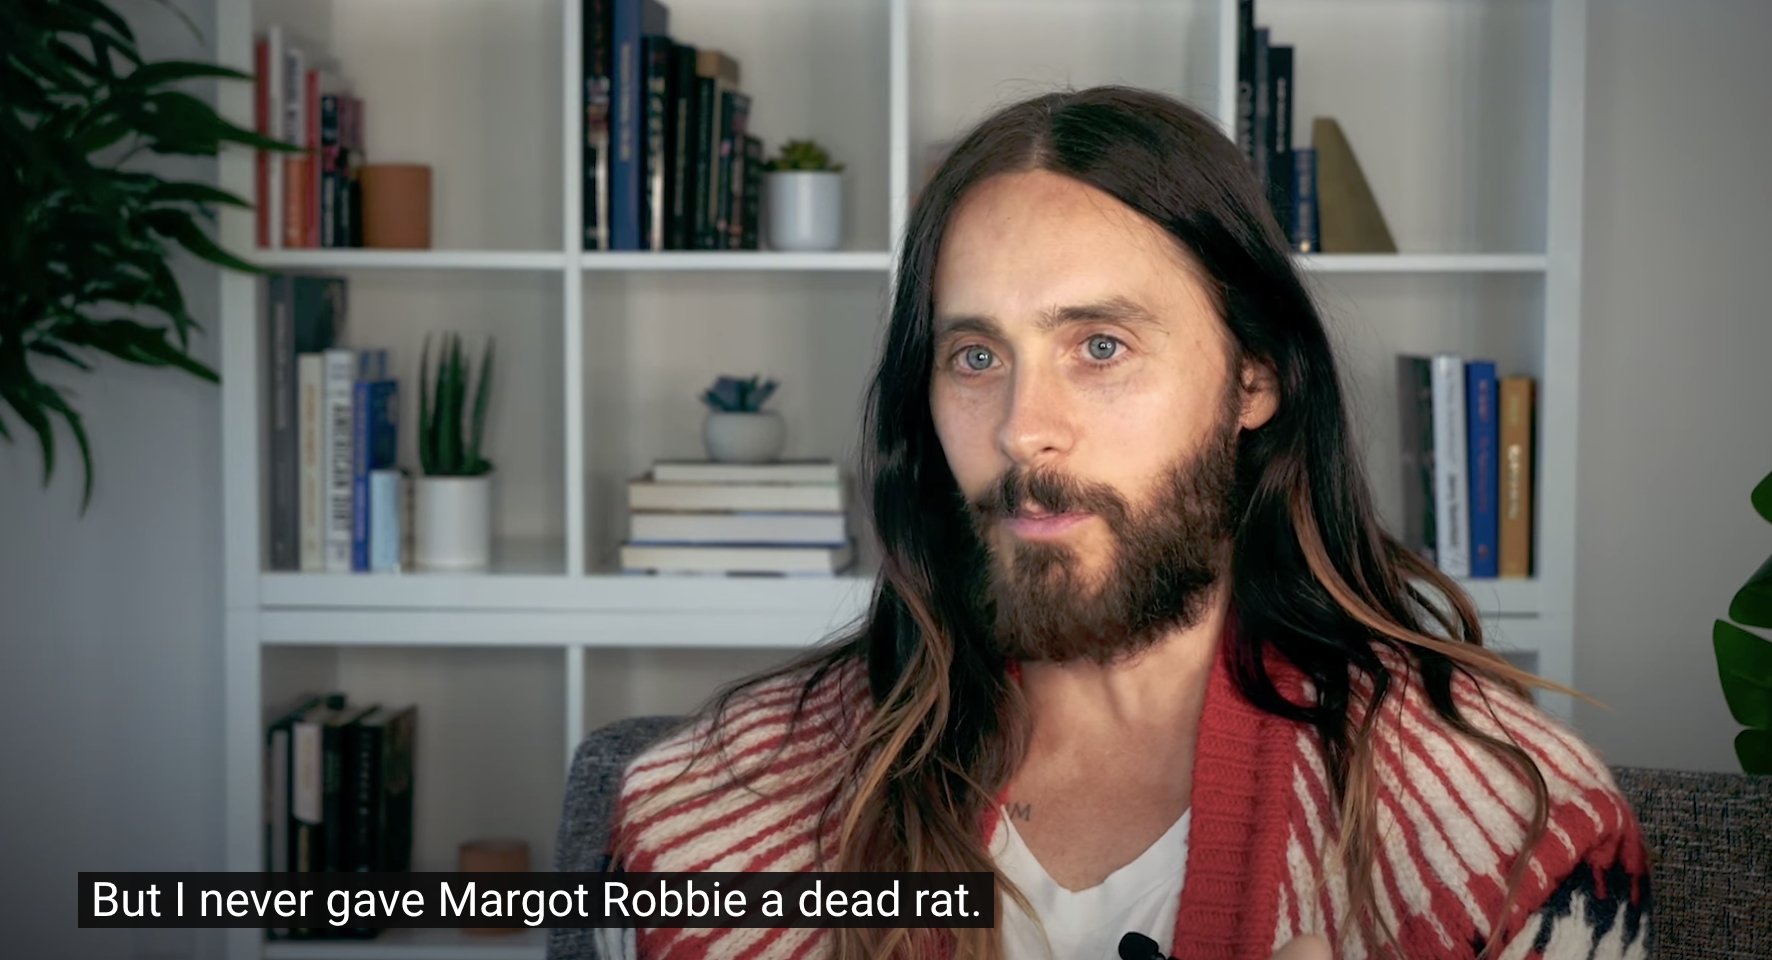 Jared Leto Claims That He Never Gave Margot Robbie A Dead Rat While ...